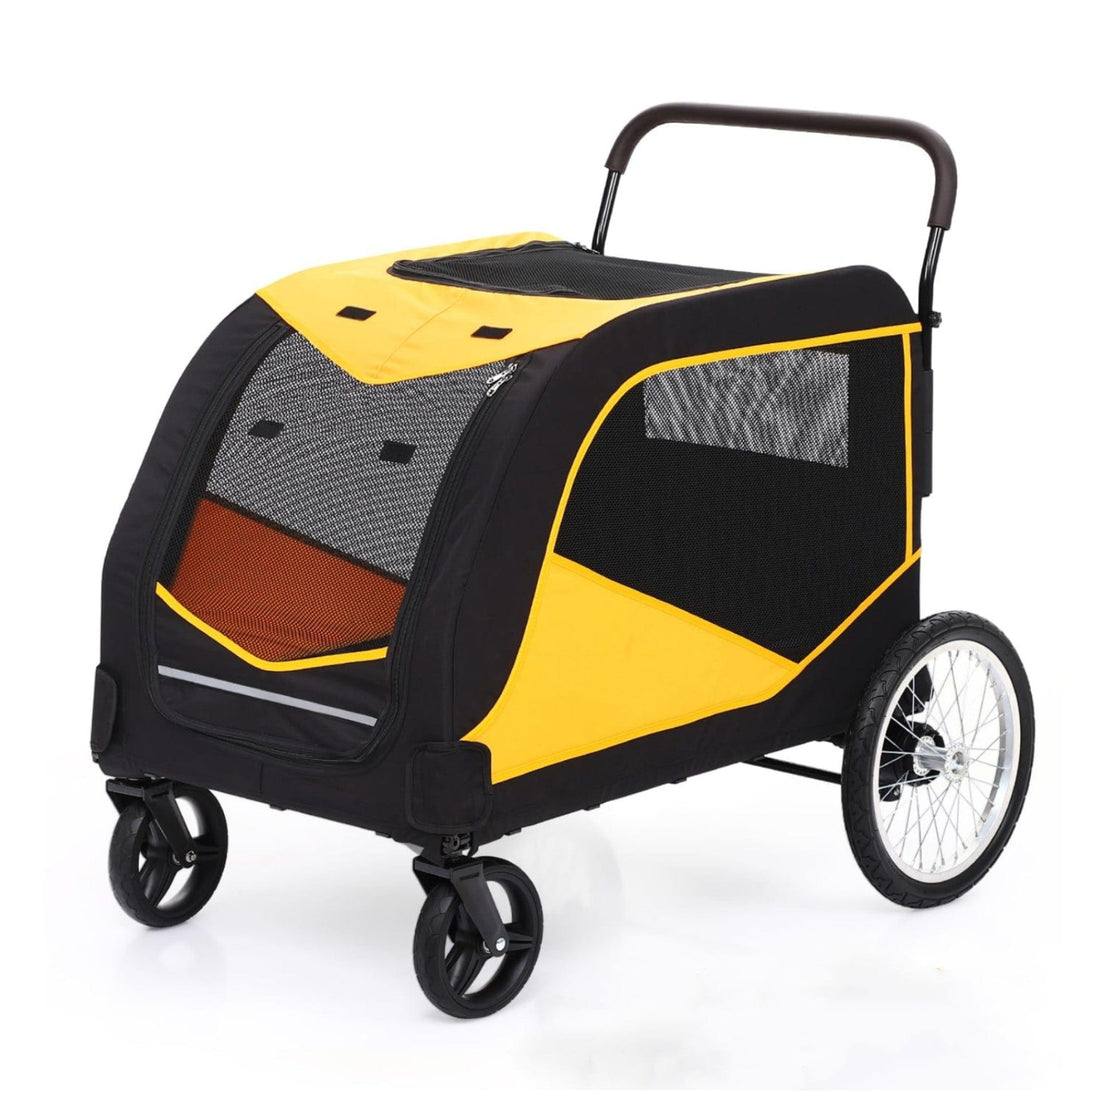 Dog Stroller for Large Pet Jogger Stroller with 4 Wheel and Storage Space Black+Yellow